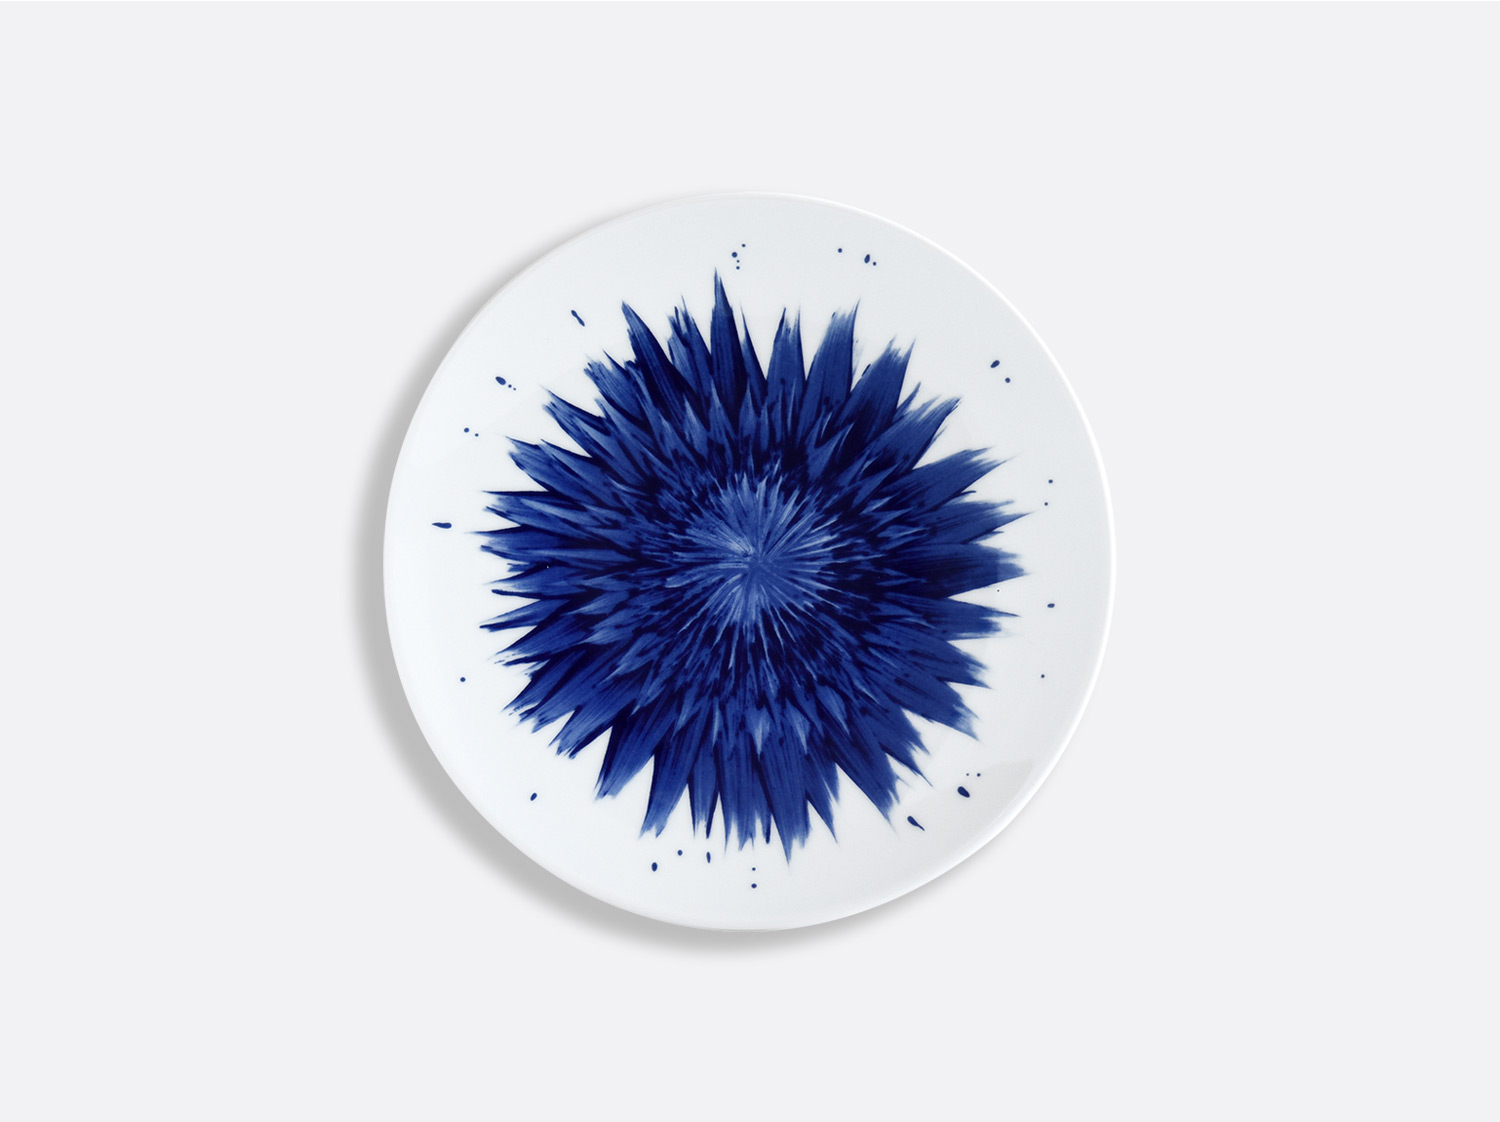 China Coupe bread and butter plate 16 cm of the collection IN BLOOM - Zemer Peled | Bernardaud